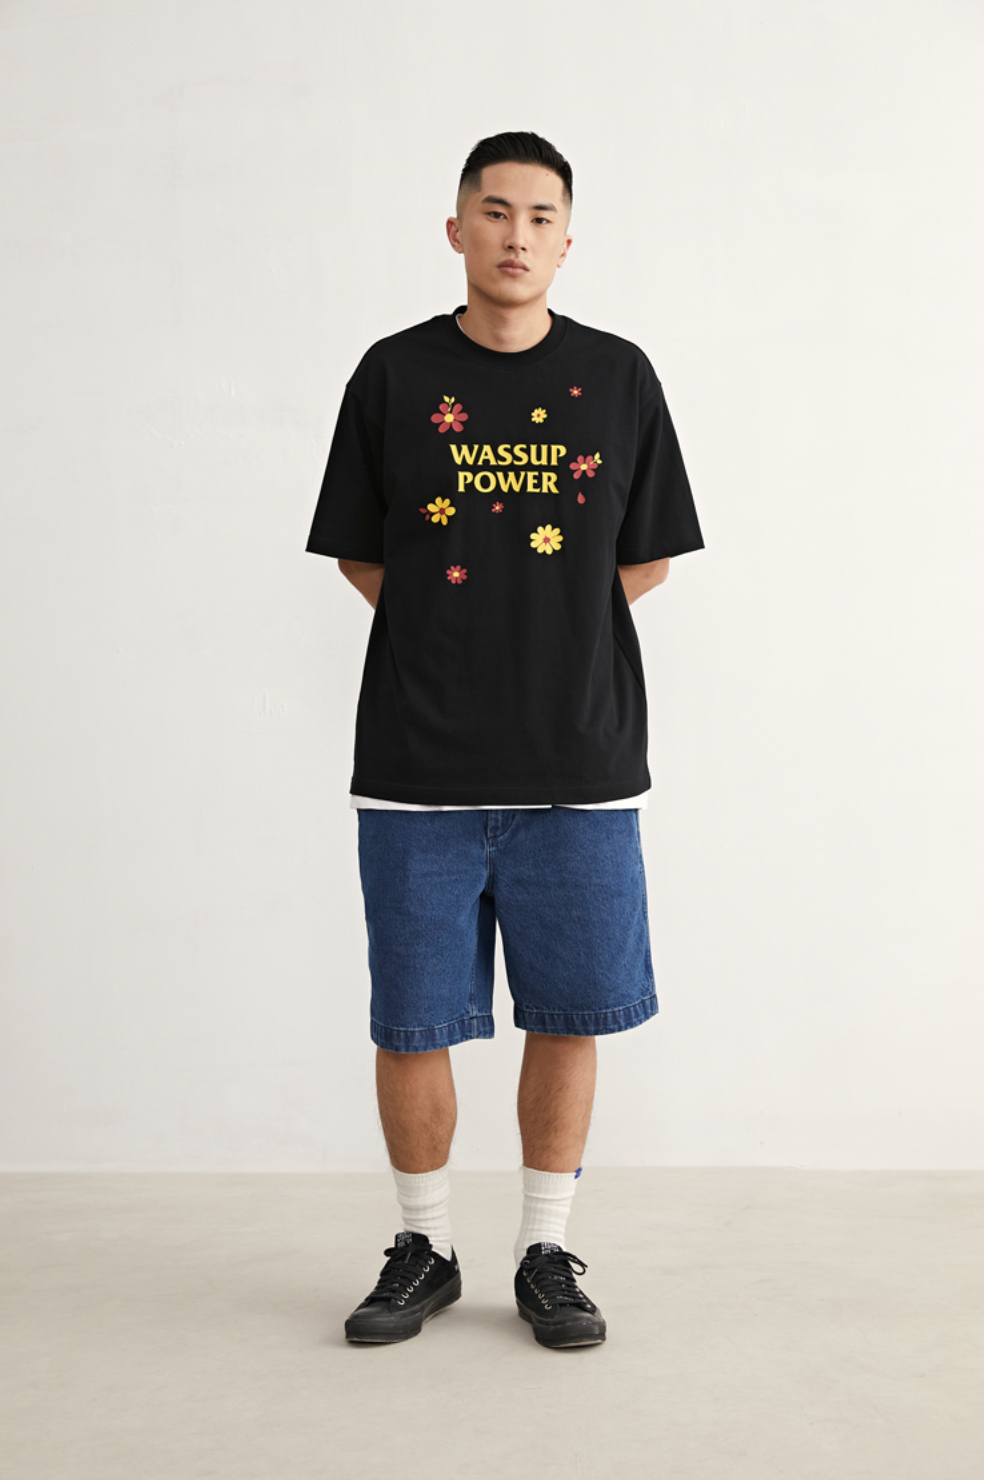 Wassup House Floral Print Tee